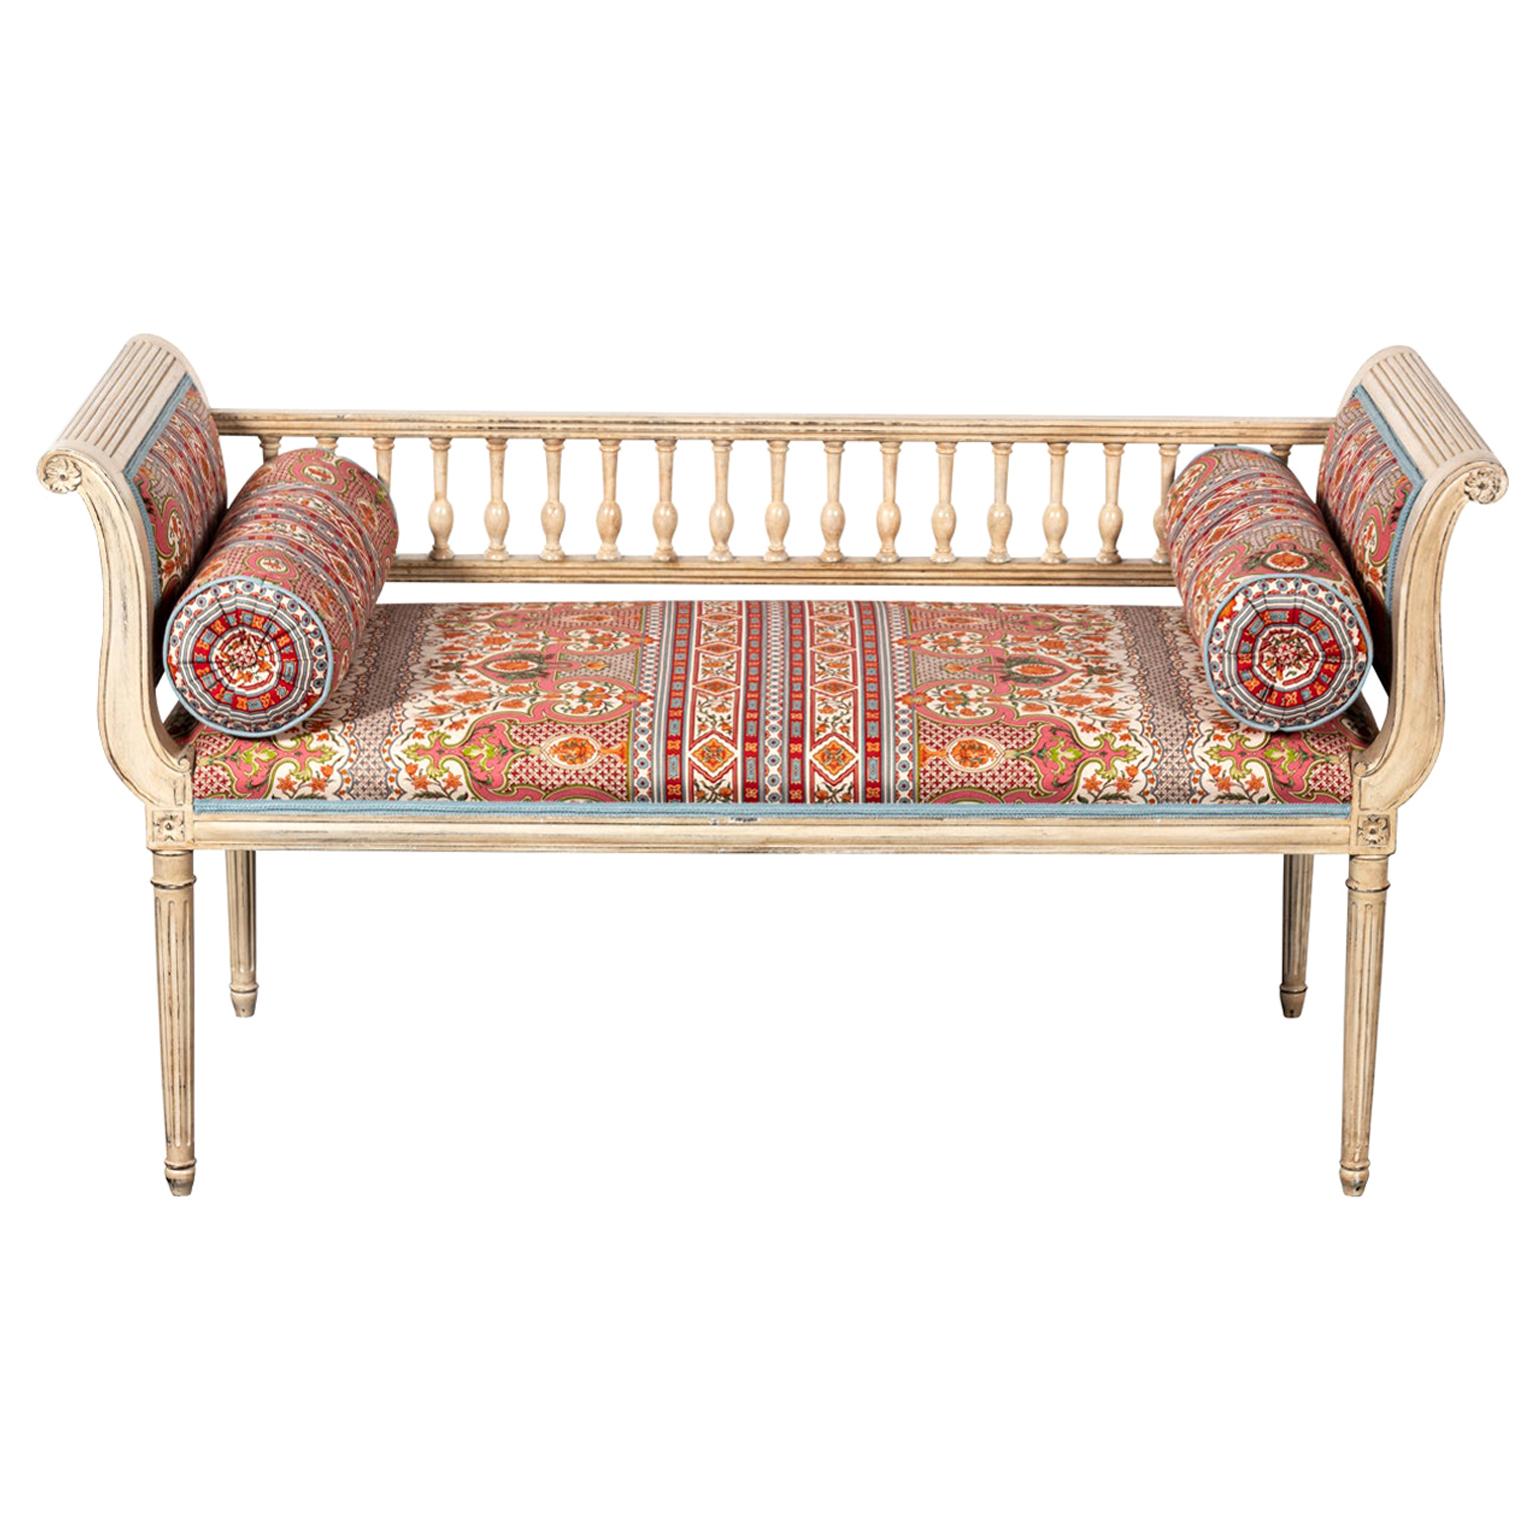 Upholstered Window Bench with Booster Cushions